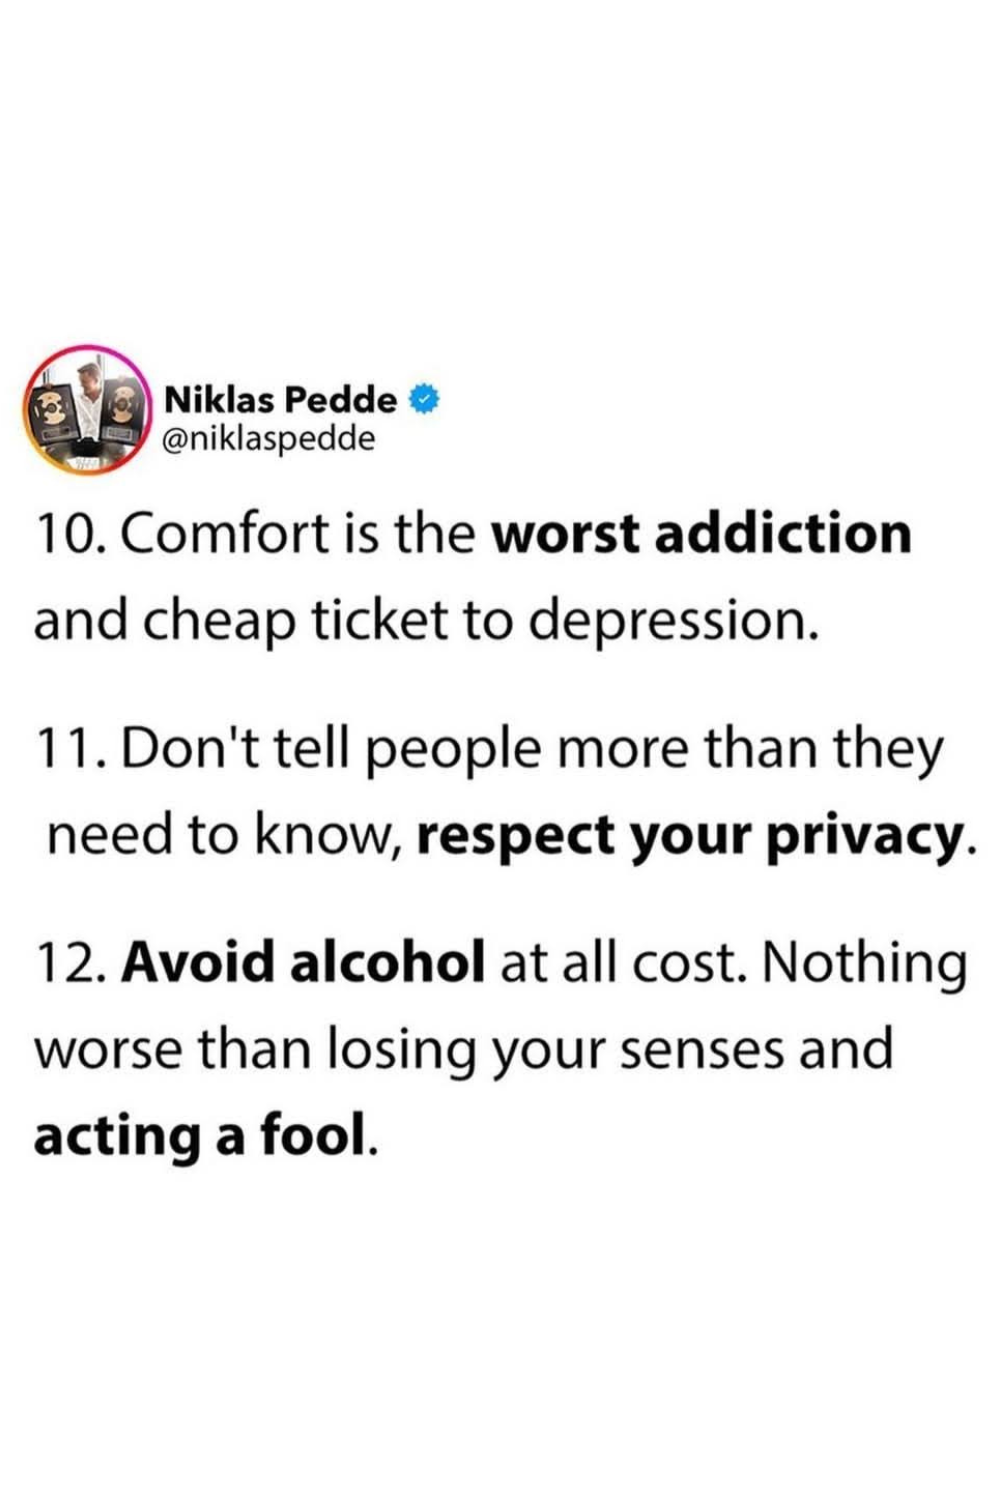 10- Comfort is the worst addiction and cheap ticket to depression. 11- Don't tell people more than they need to know, respect your privacy. 12- Avoid alcohol at all cost. Nothing worse than losing your senses and acting a fool.